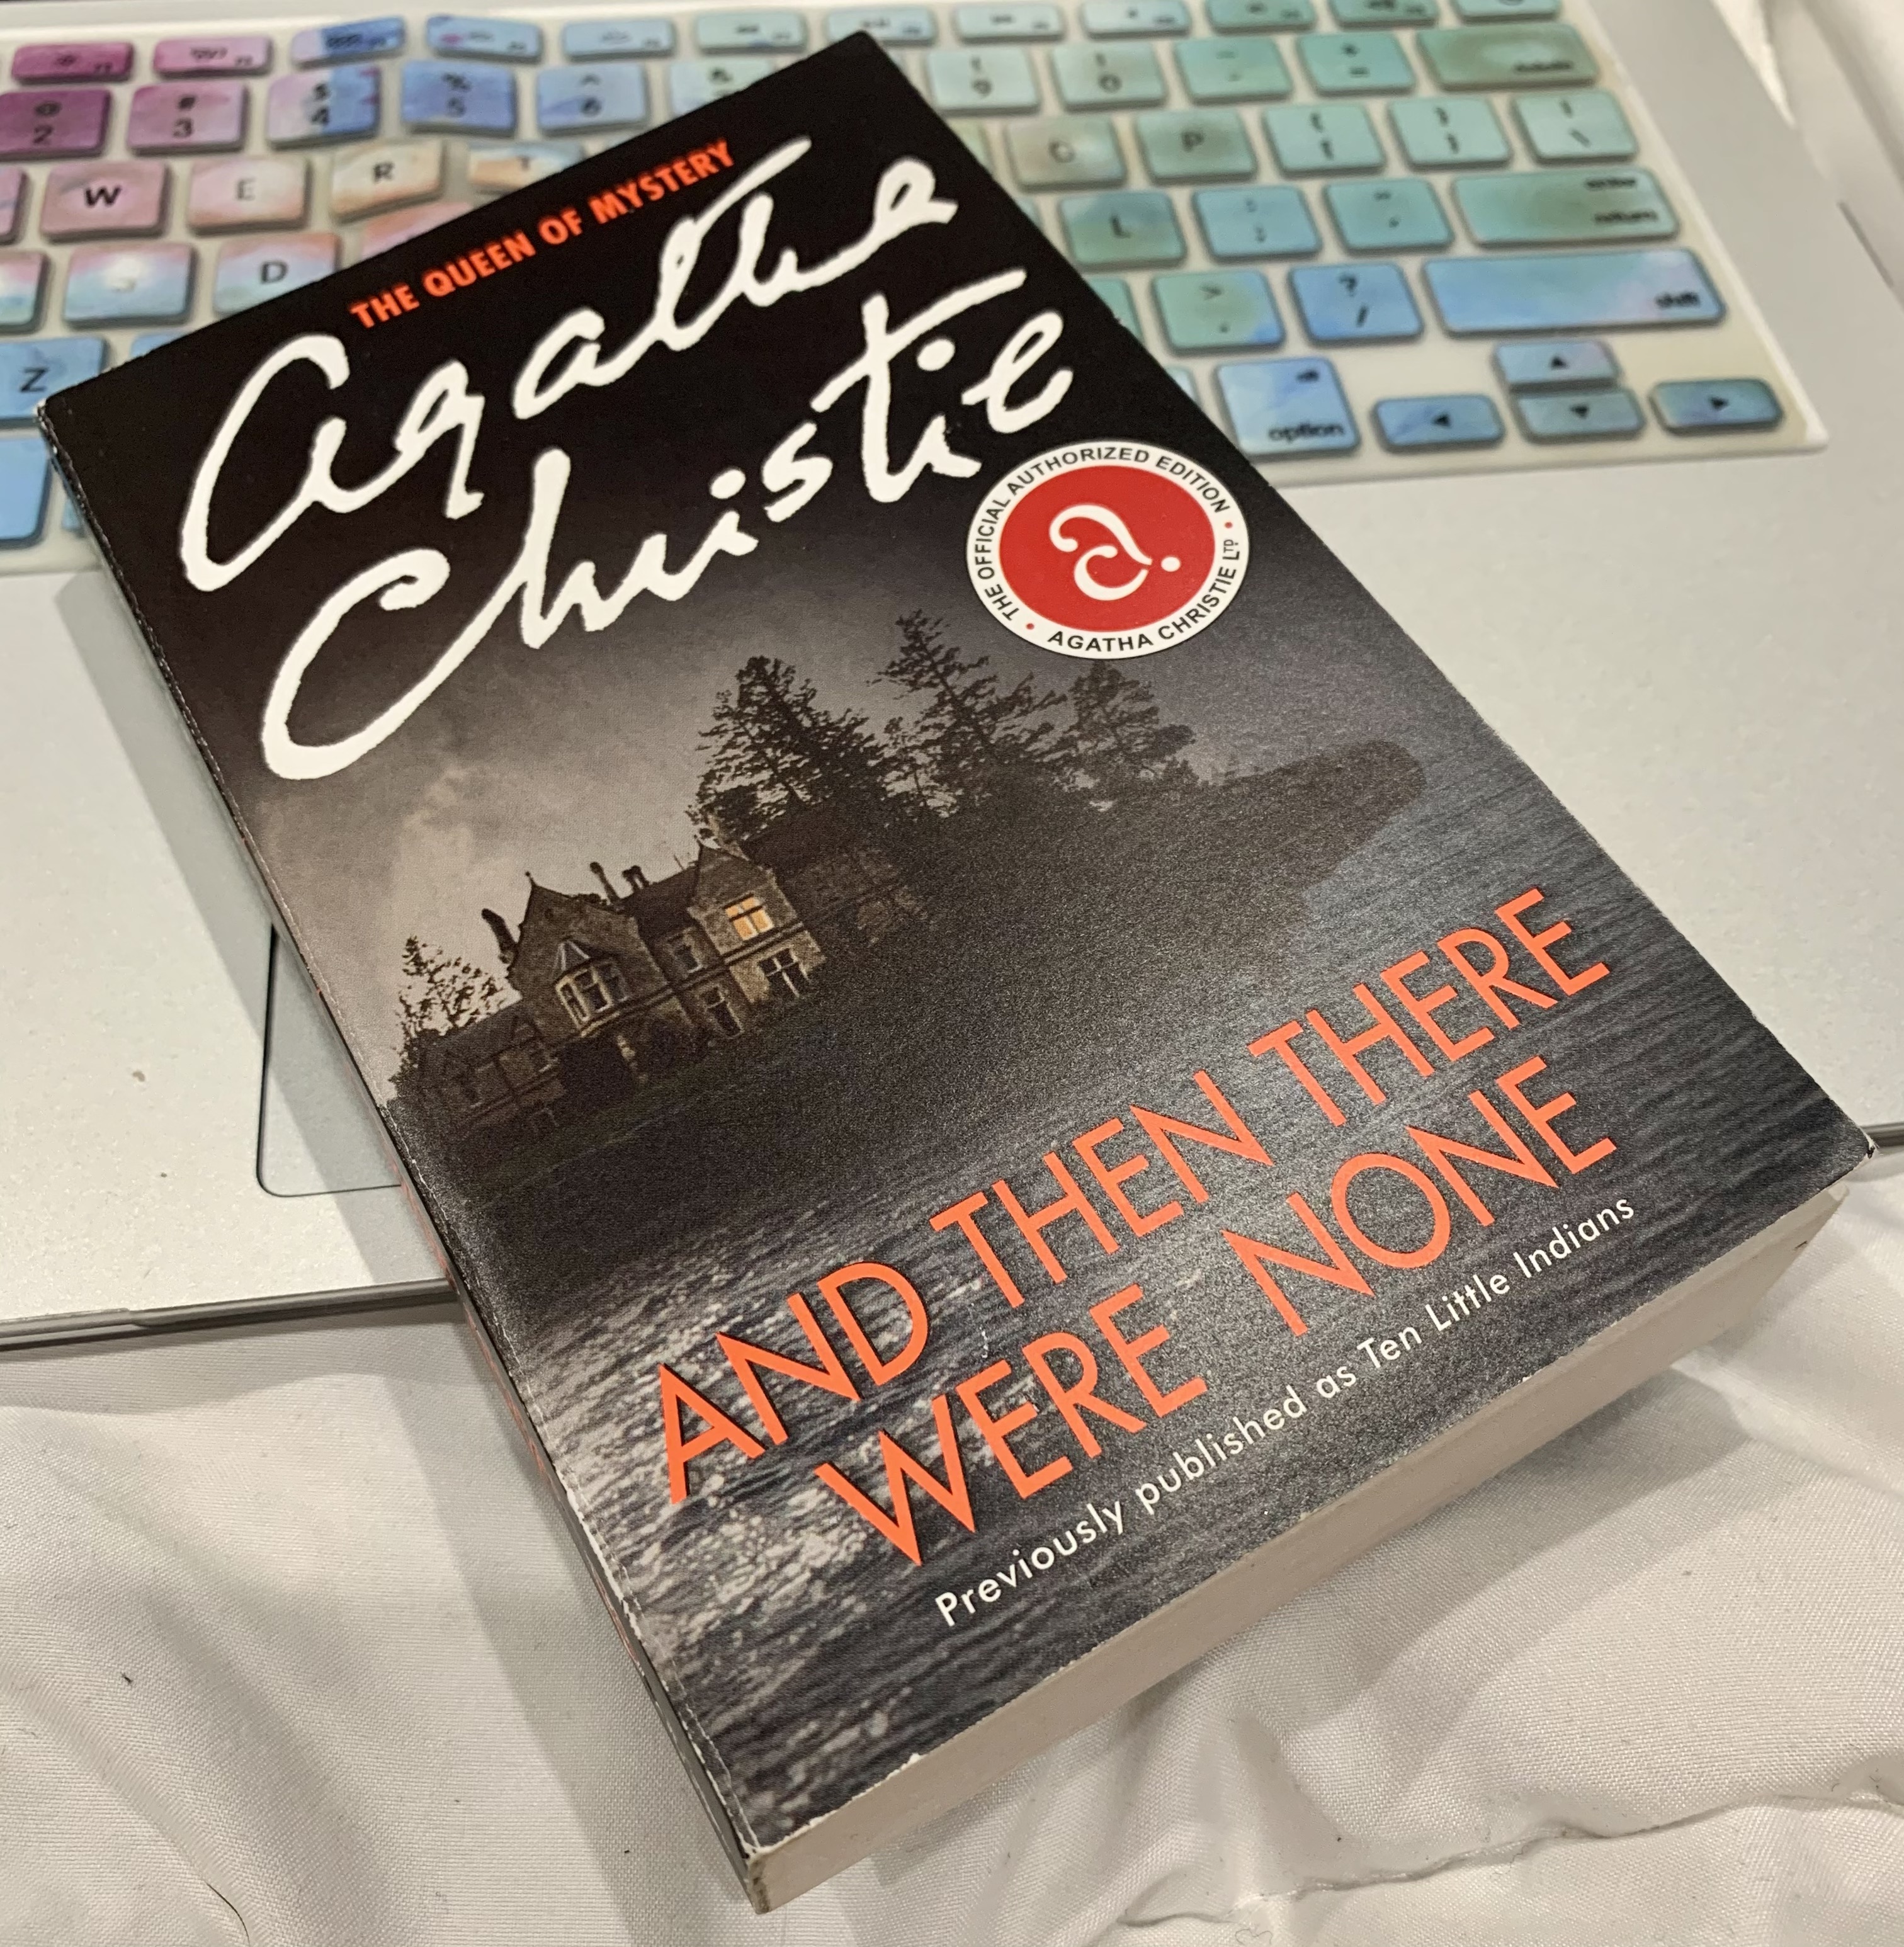 And Then There Were None book by Agatha Christie sitting on open laptop